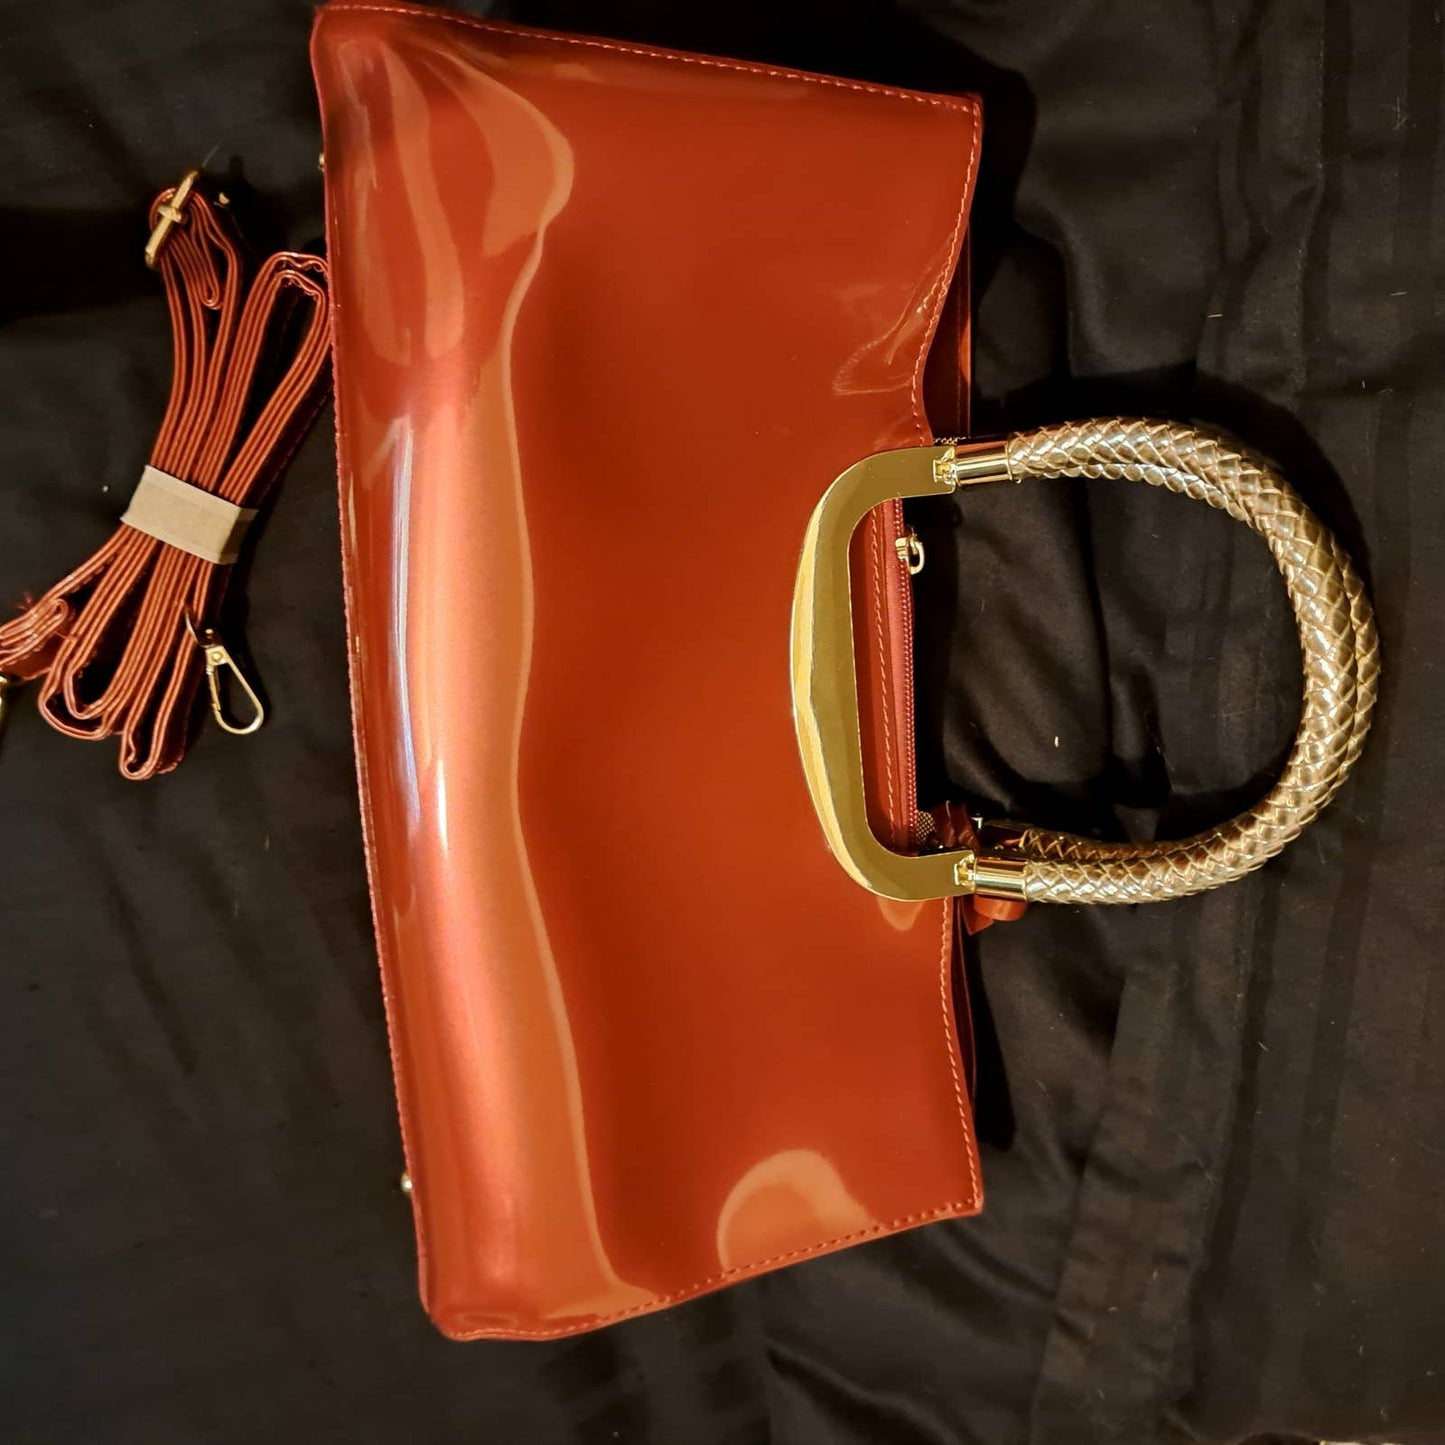 New sassy and sexy top handle box in delicious red